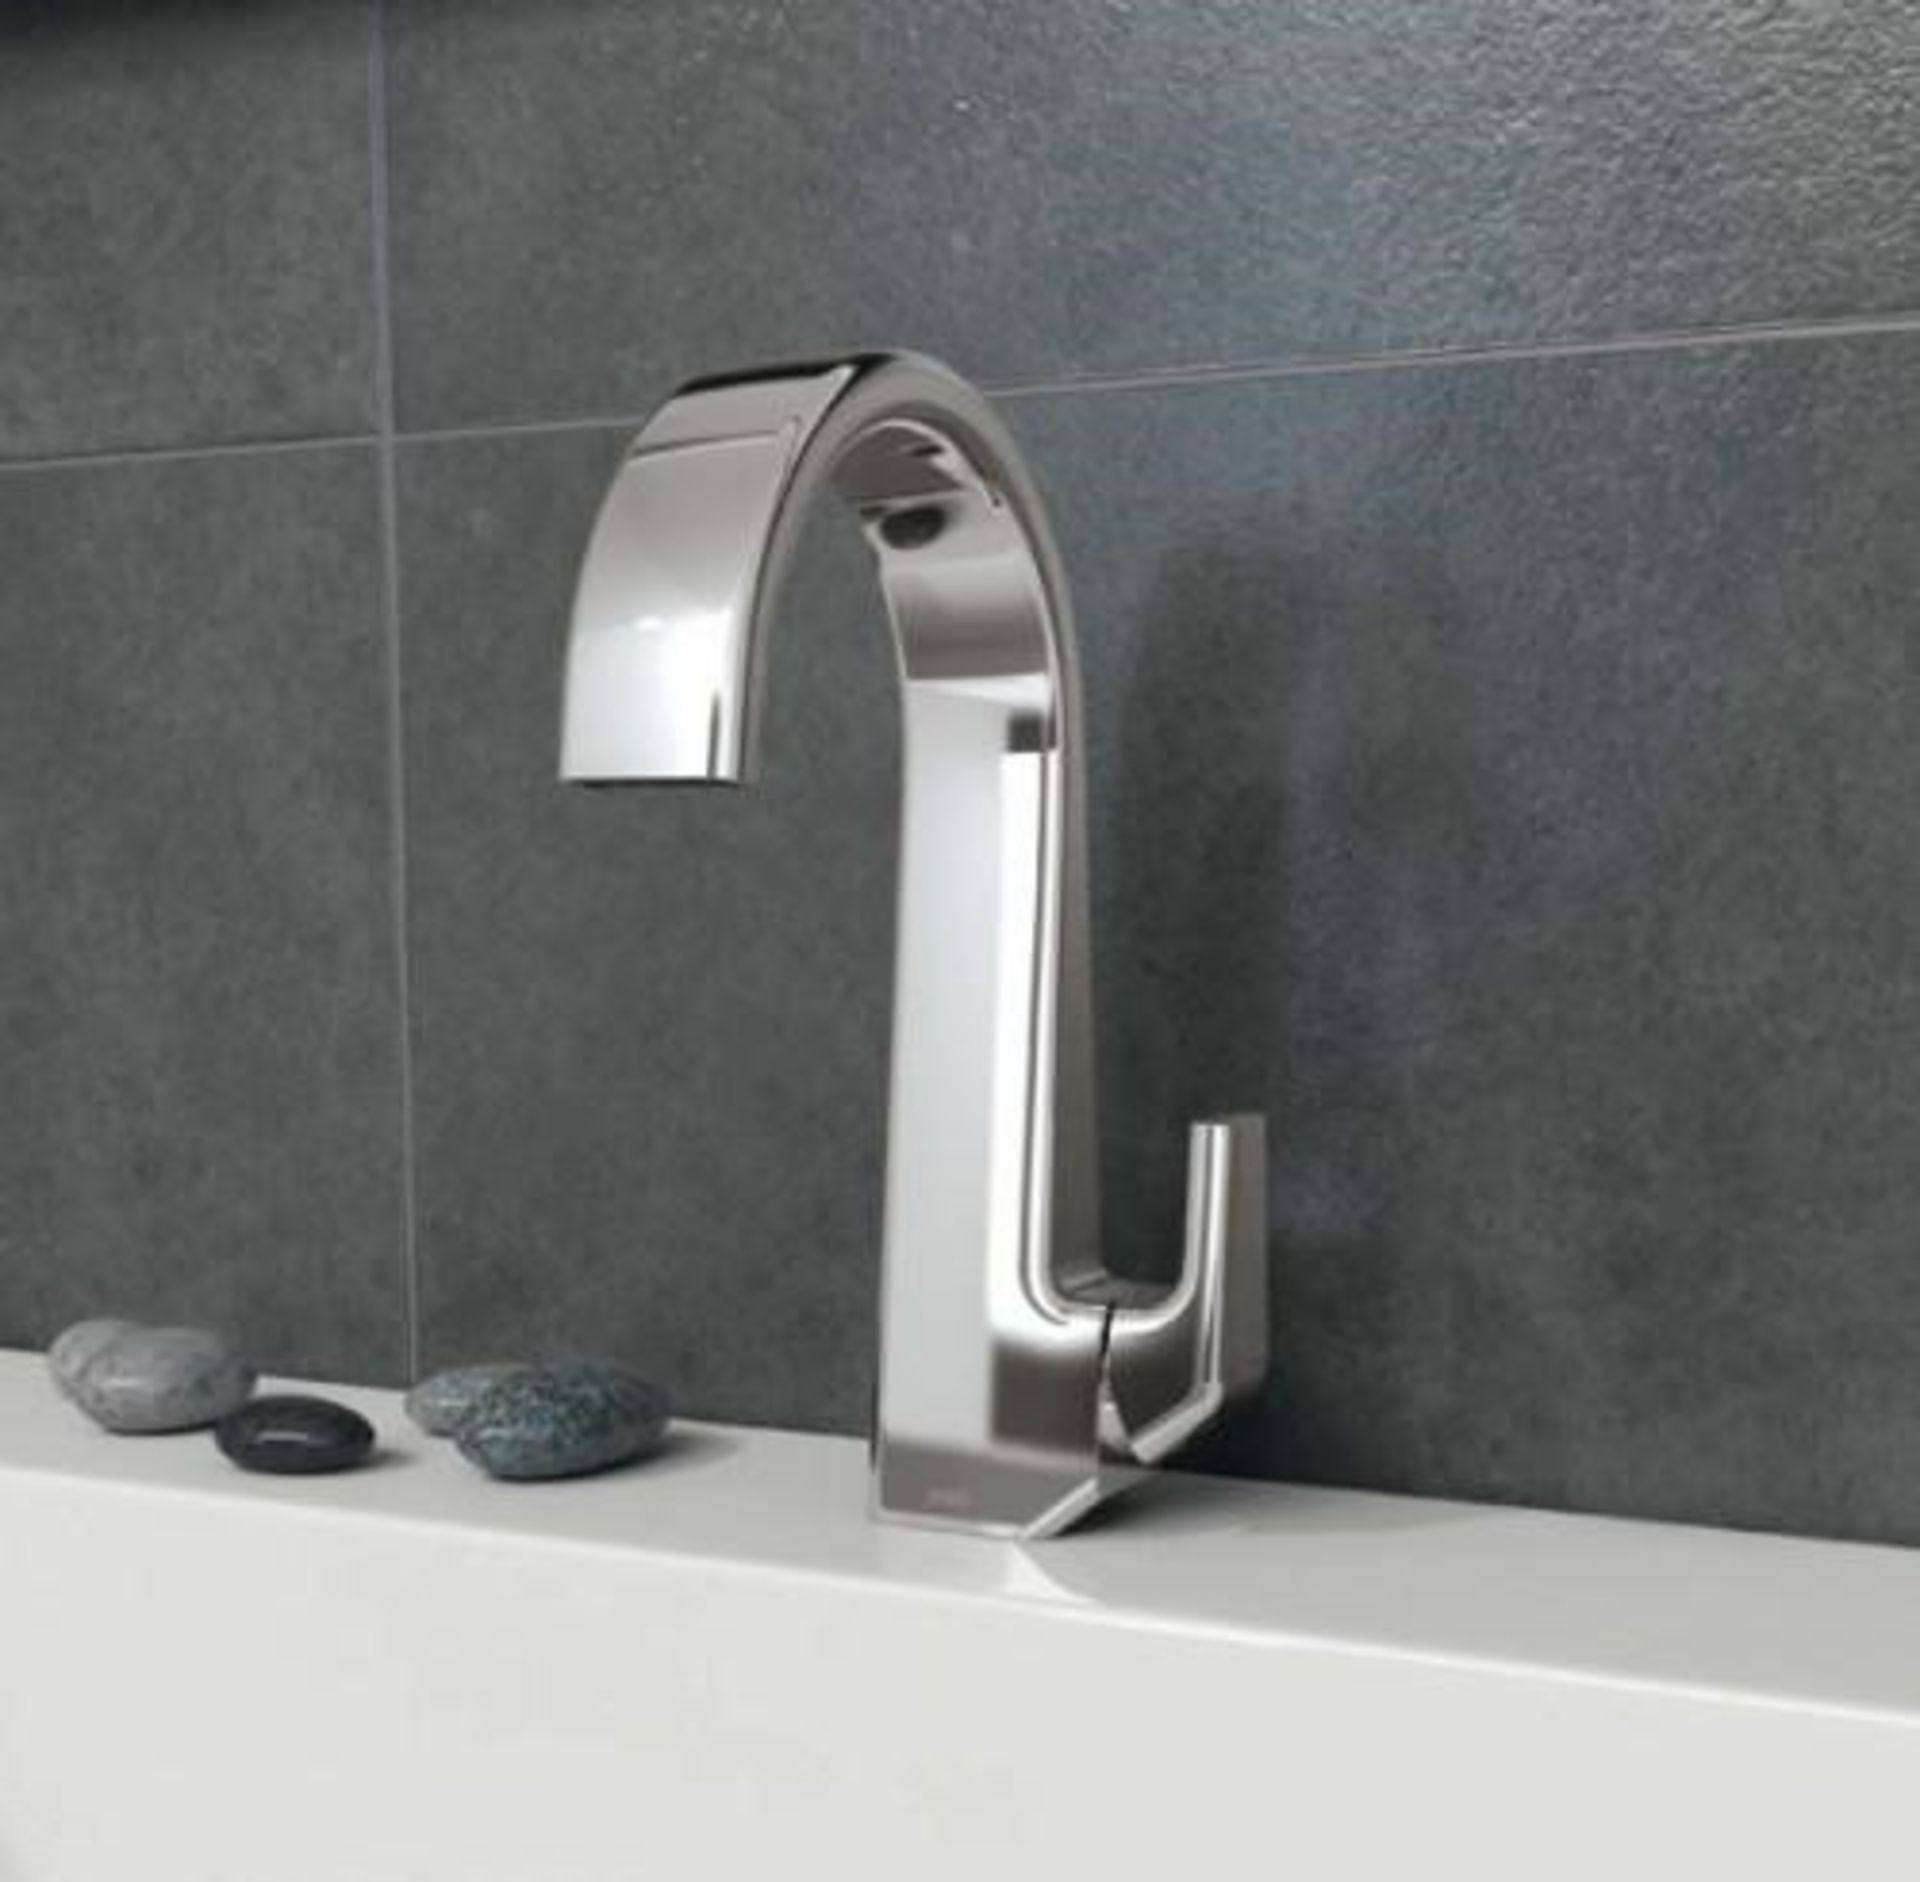 1 x Ideal Standard JADO "Jes" Single Lever Basin Mixer Without Waste Set (H4485AA)